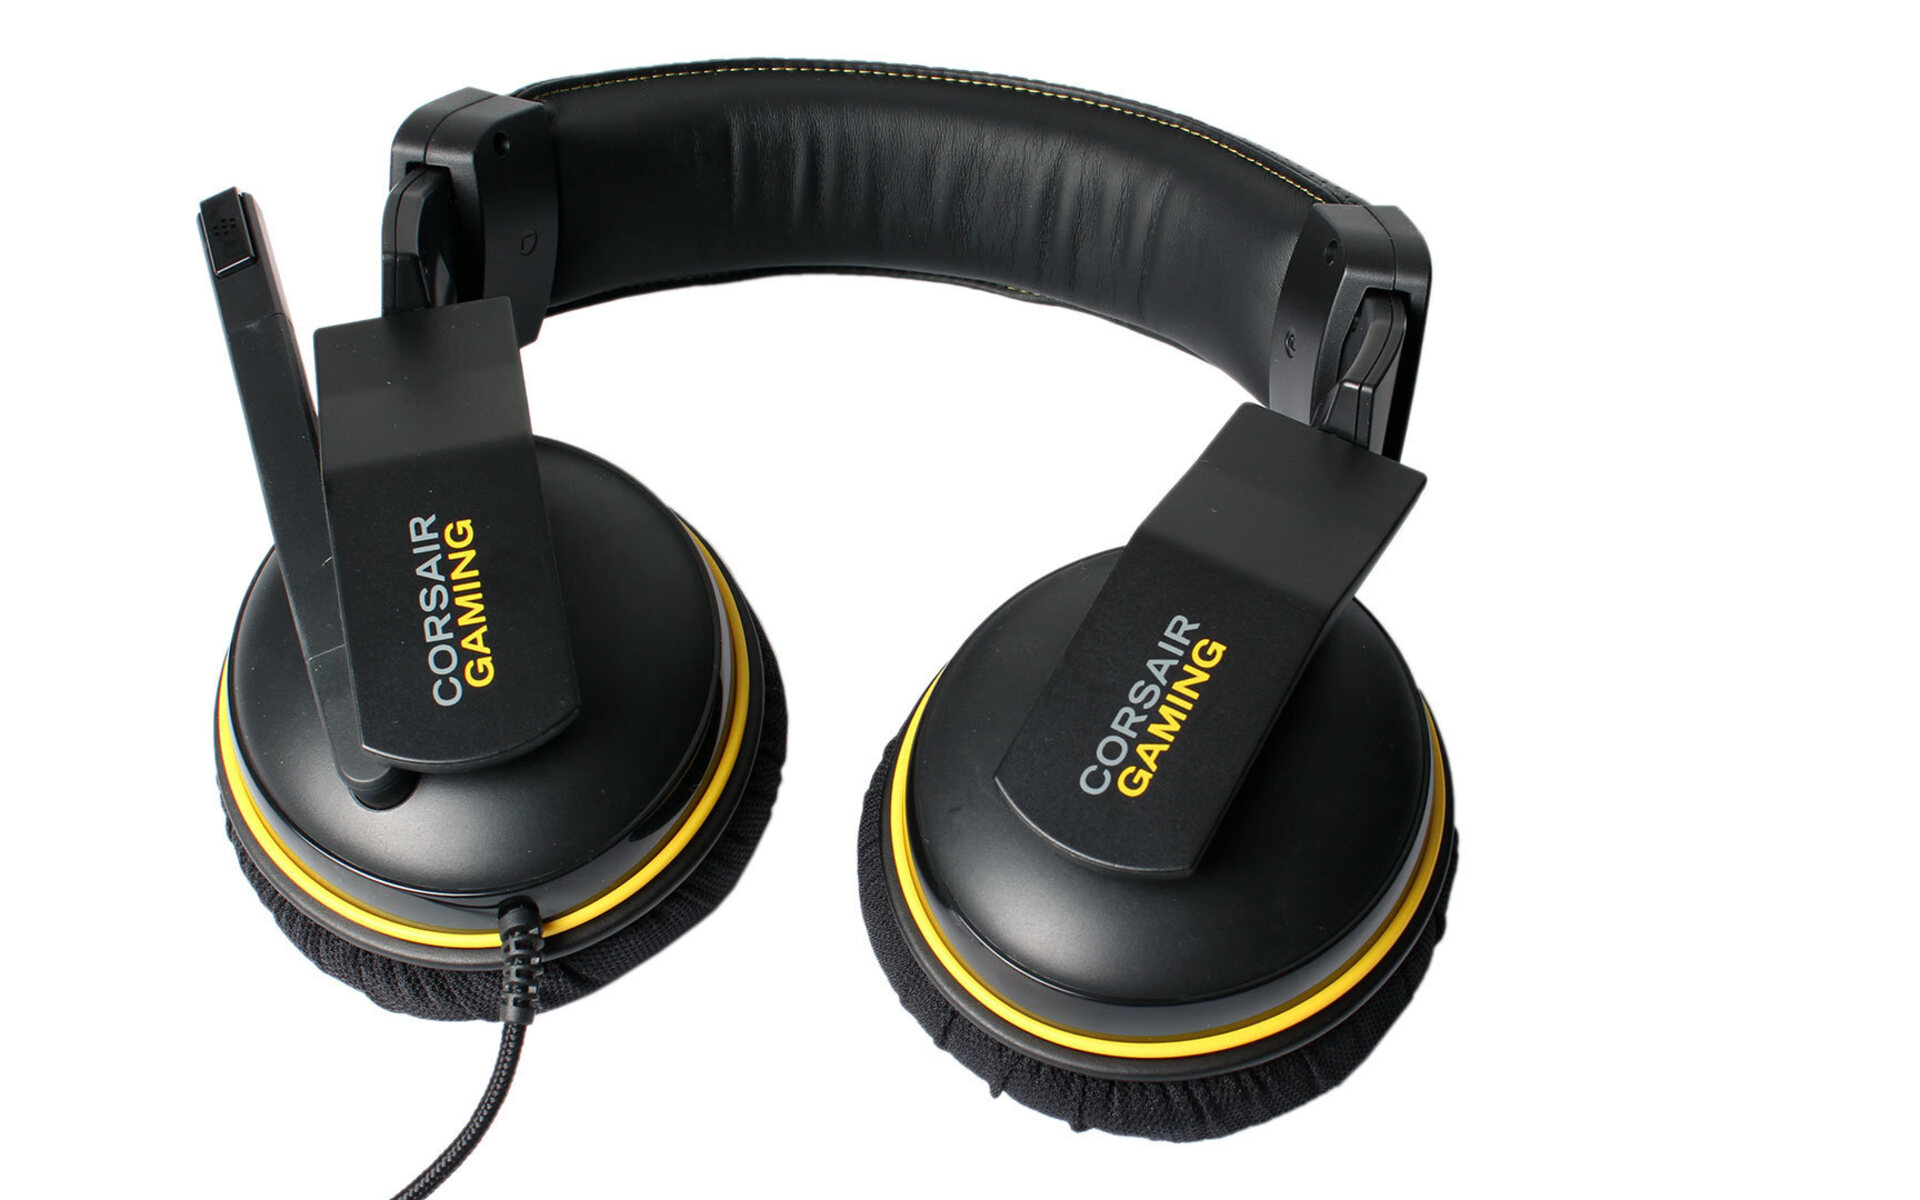 corsair-gaming-h1500-dolby-7-1-gaming-headset-acts-up-when-i-change-the-volume-off-my-keyboard